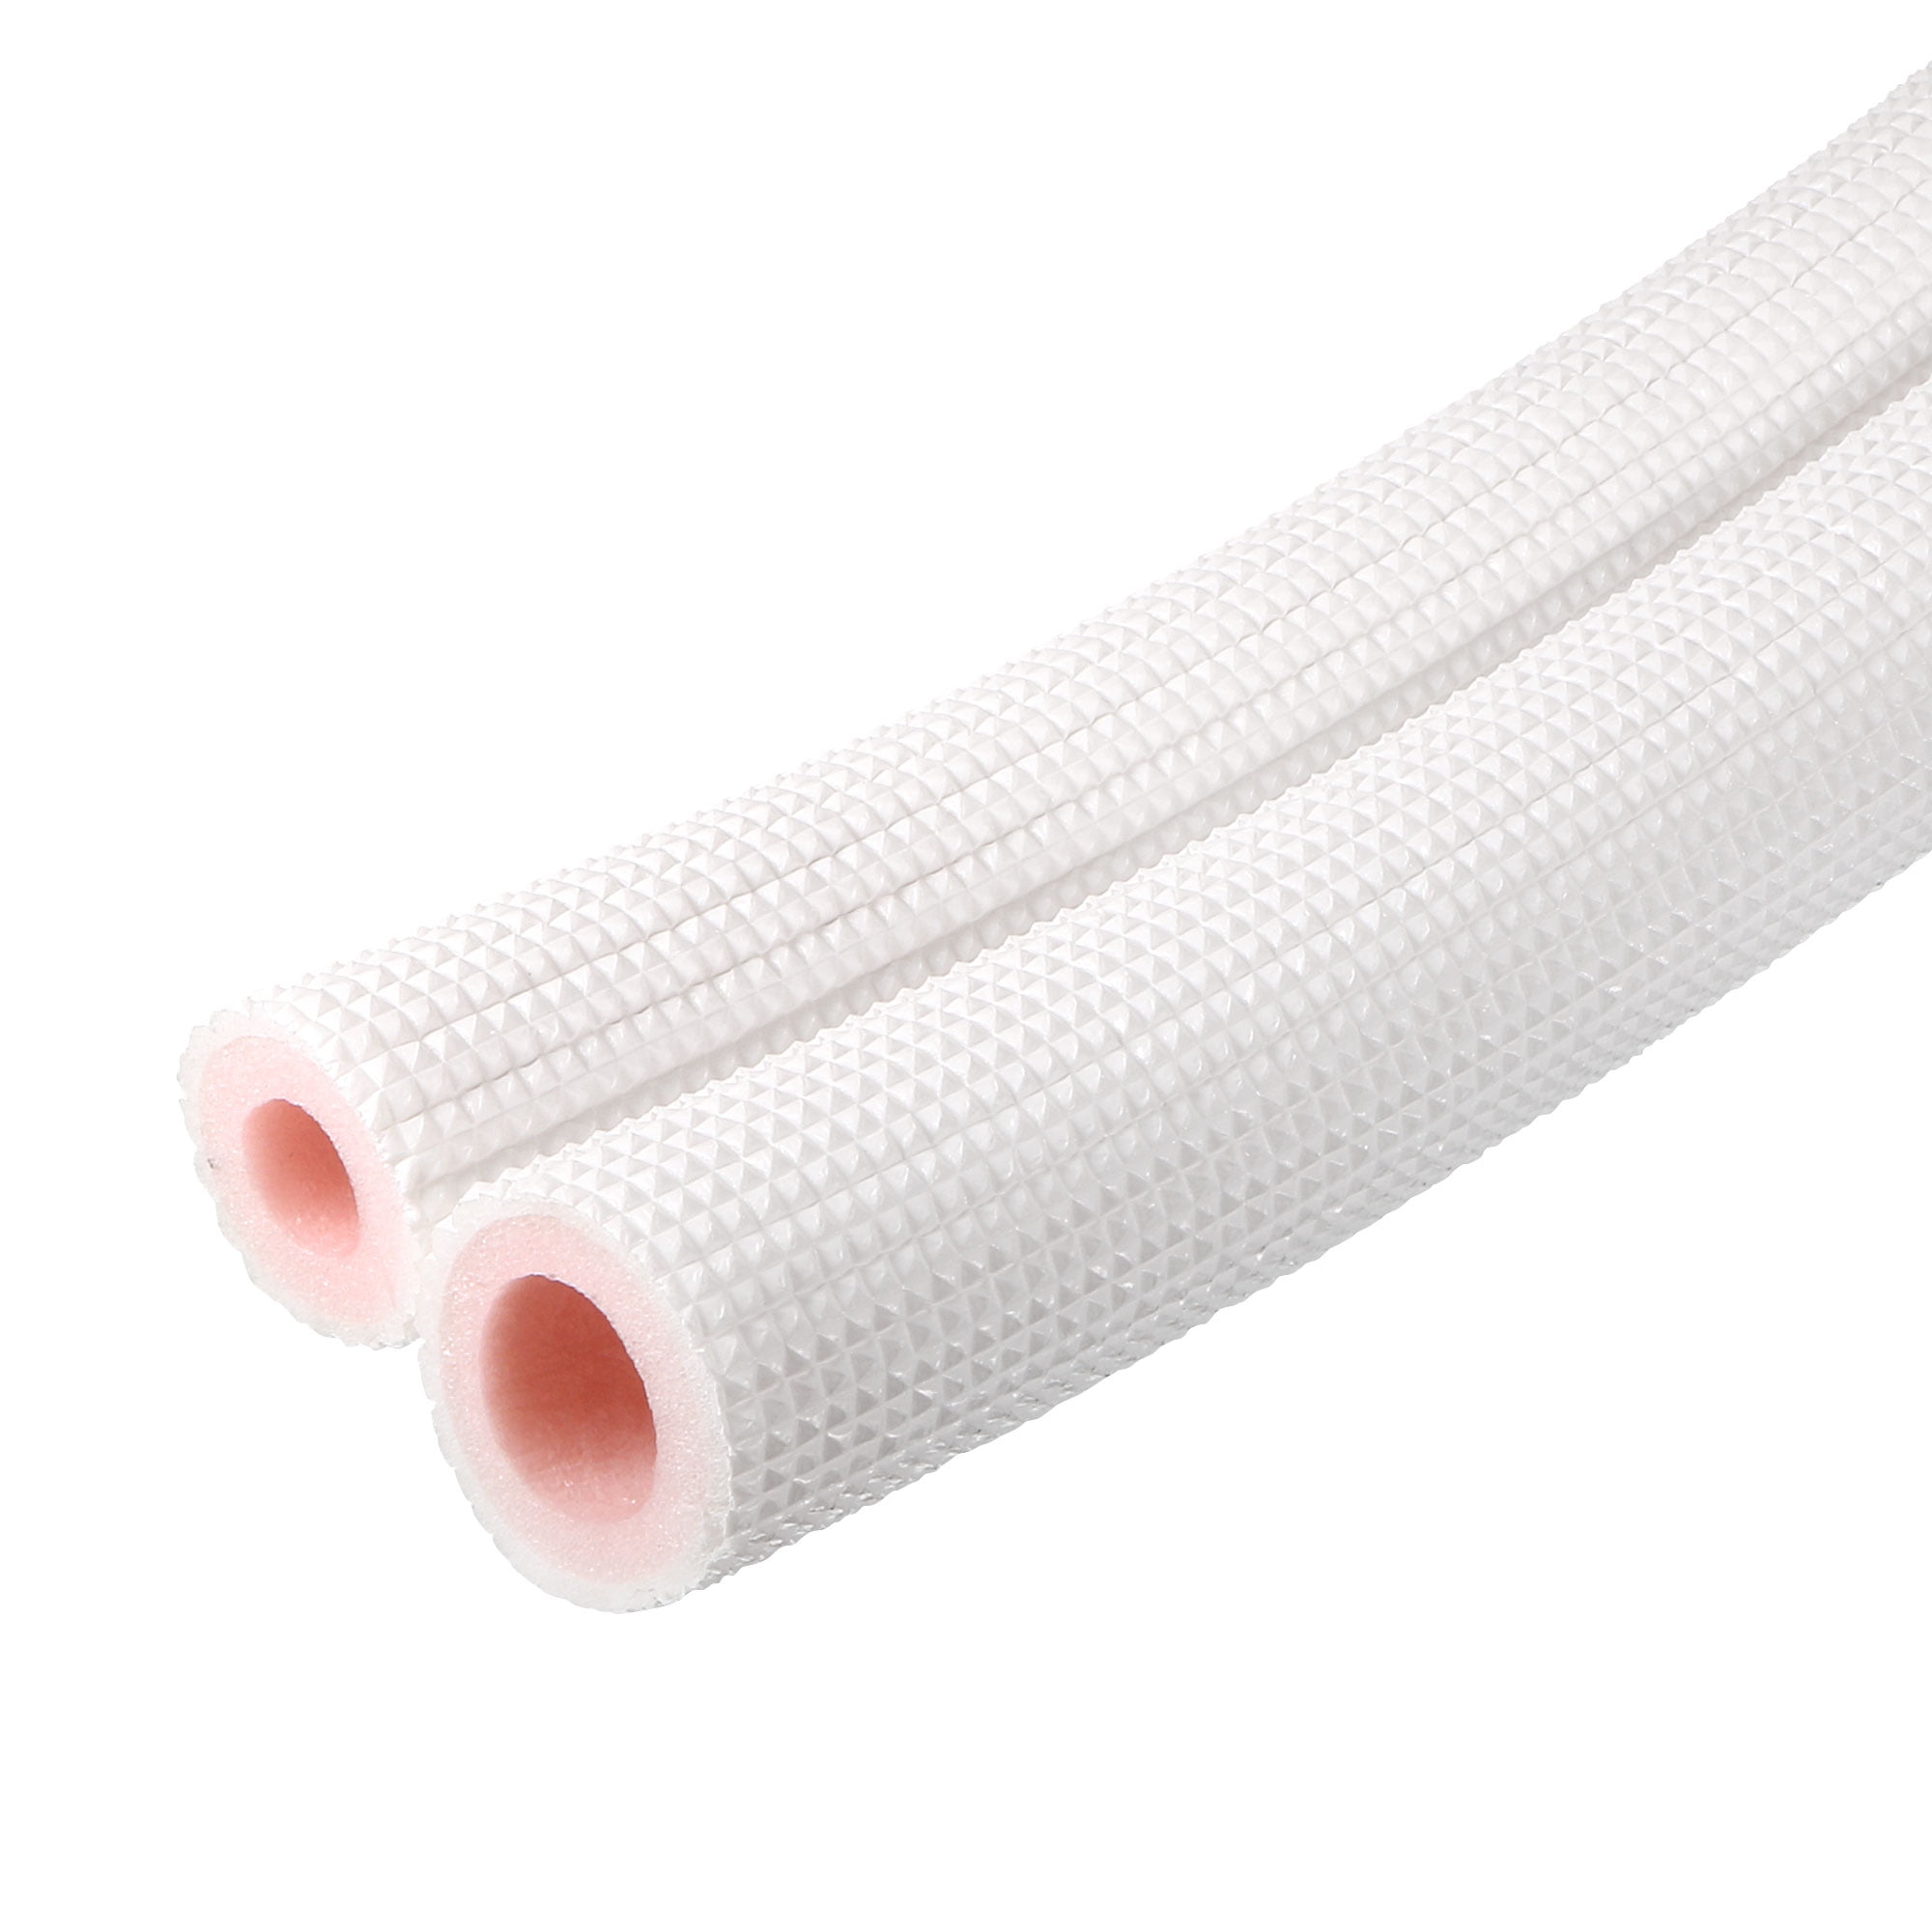 Insulation Tubing 28mm ID X 25mm Wall for Padding and Insulation 2 x 1mtr 